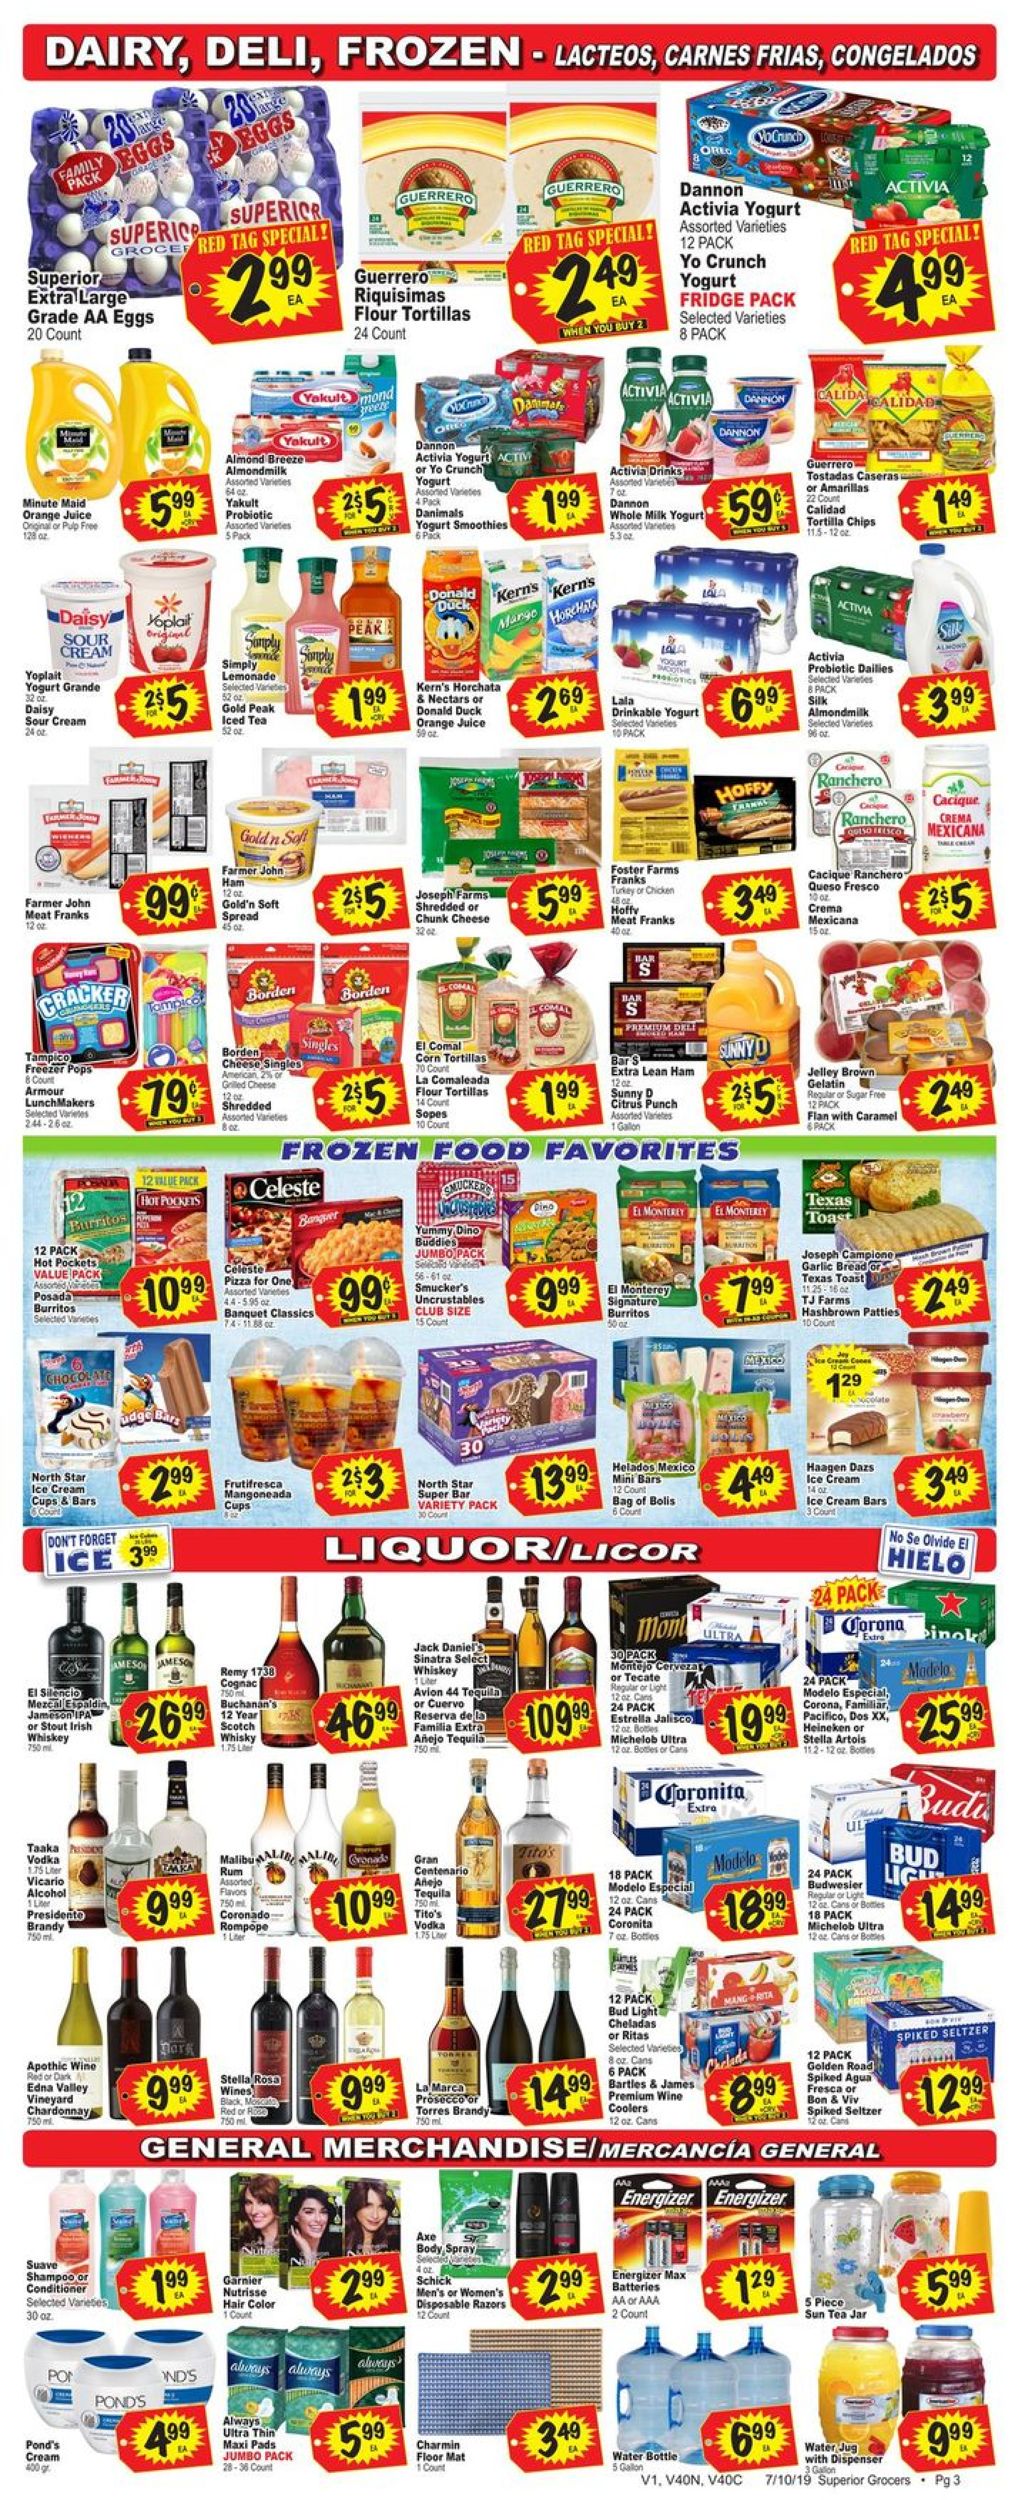 Catalogue Superior Grocers from 07/10/2019